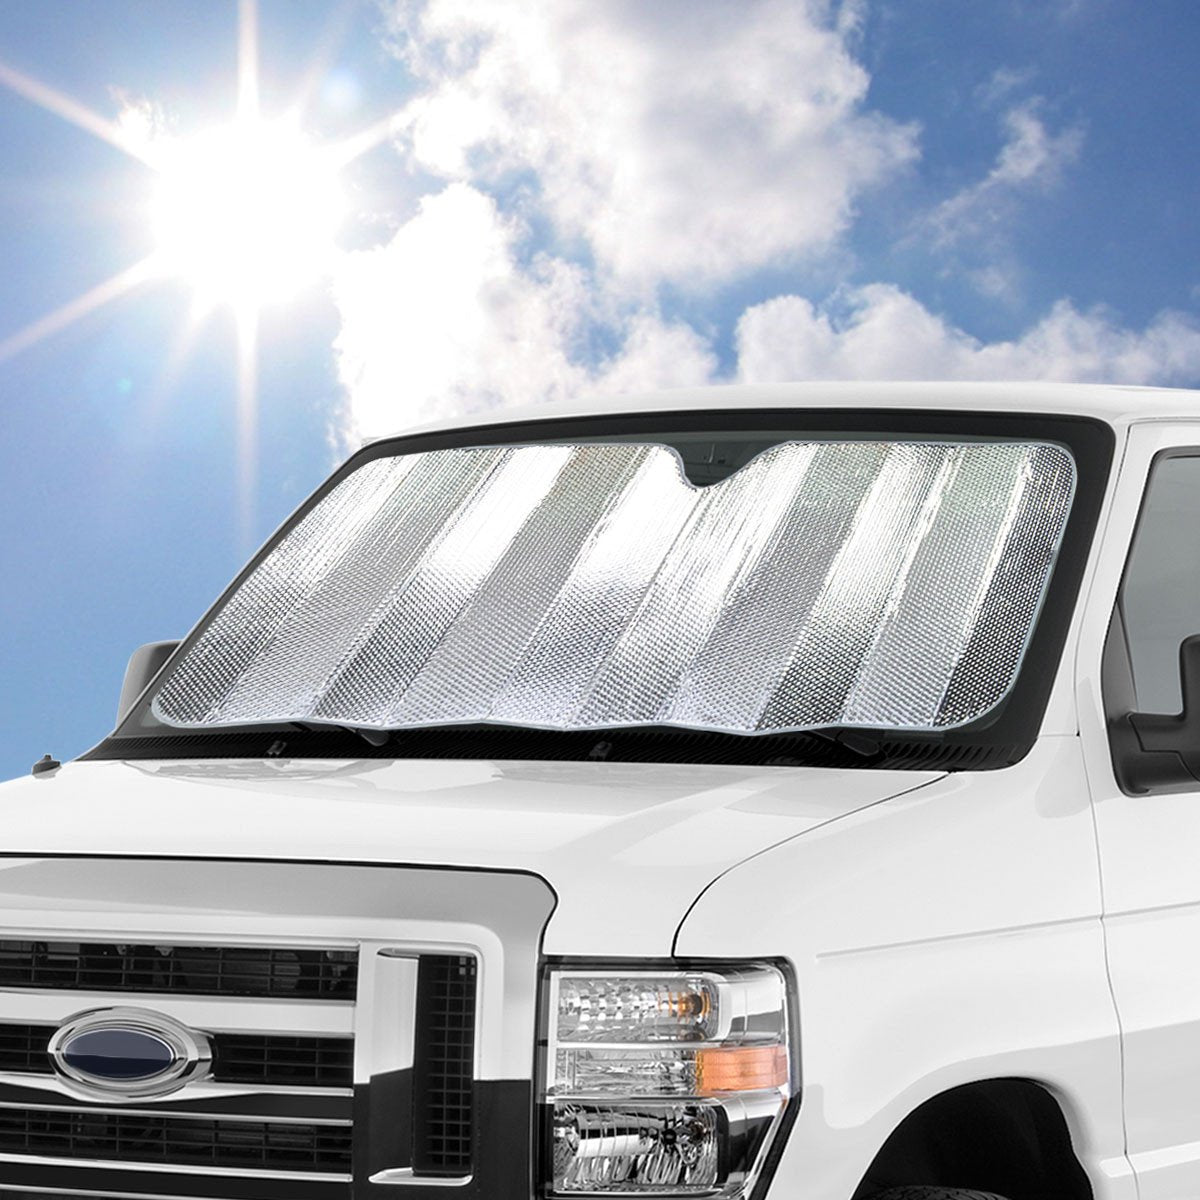 BDK Universal Car Sun Shades-Foldable Heat & UV Ray Protection-Sunshade to Keep Your Vehicle Cool and Damage Free, Easy to Use, Fits Windshields of Various Sizes (Jumbo) (AS-212